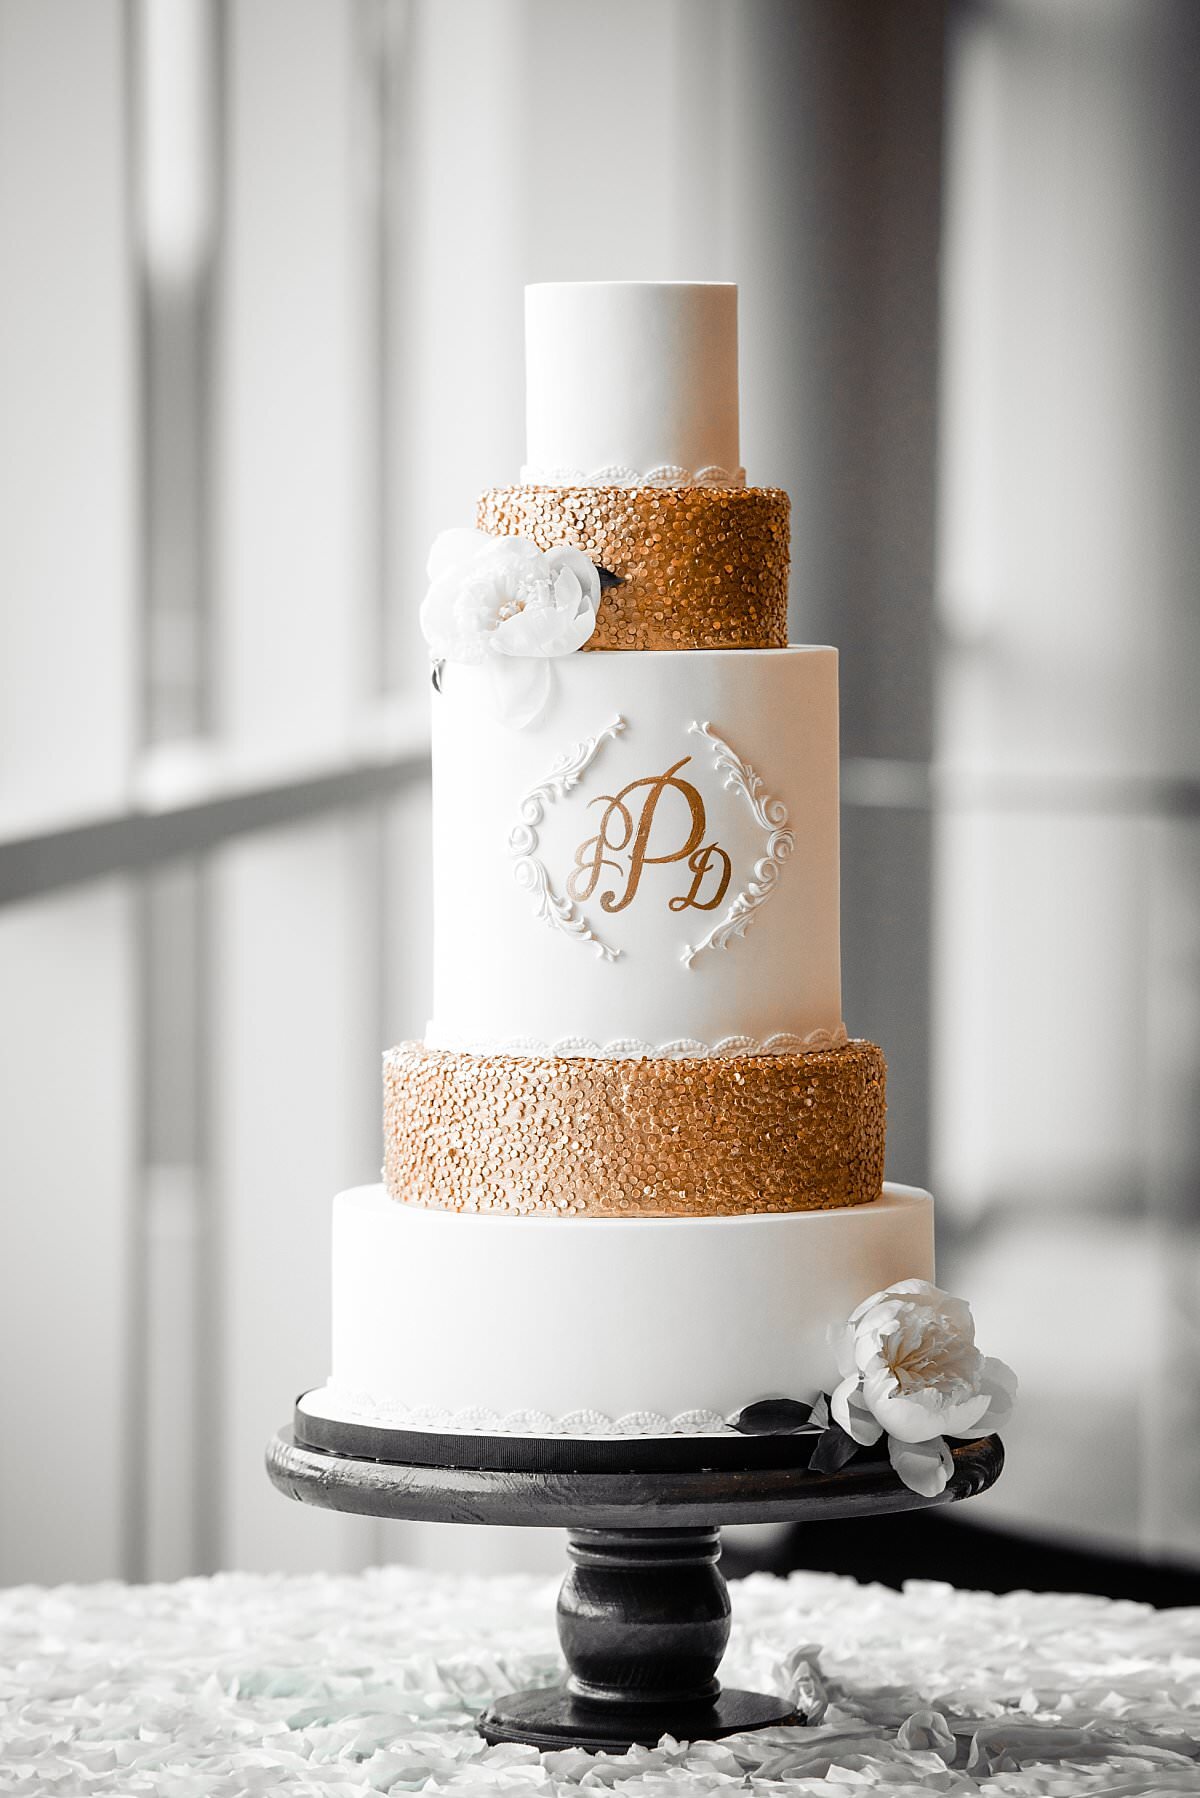 5 Tier White and GOld Wedding Cake with hand painted monogram and gold textured layers with white flowers